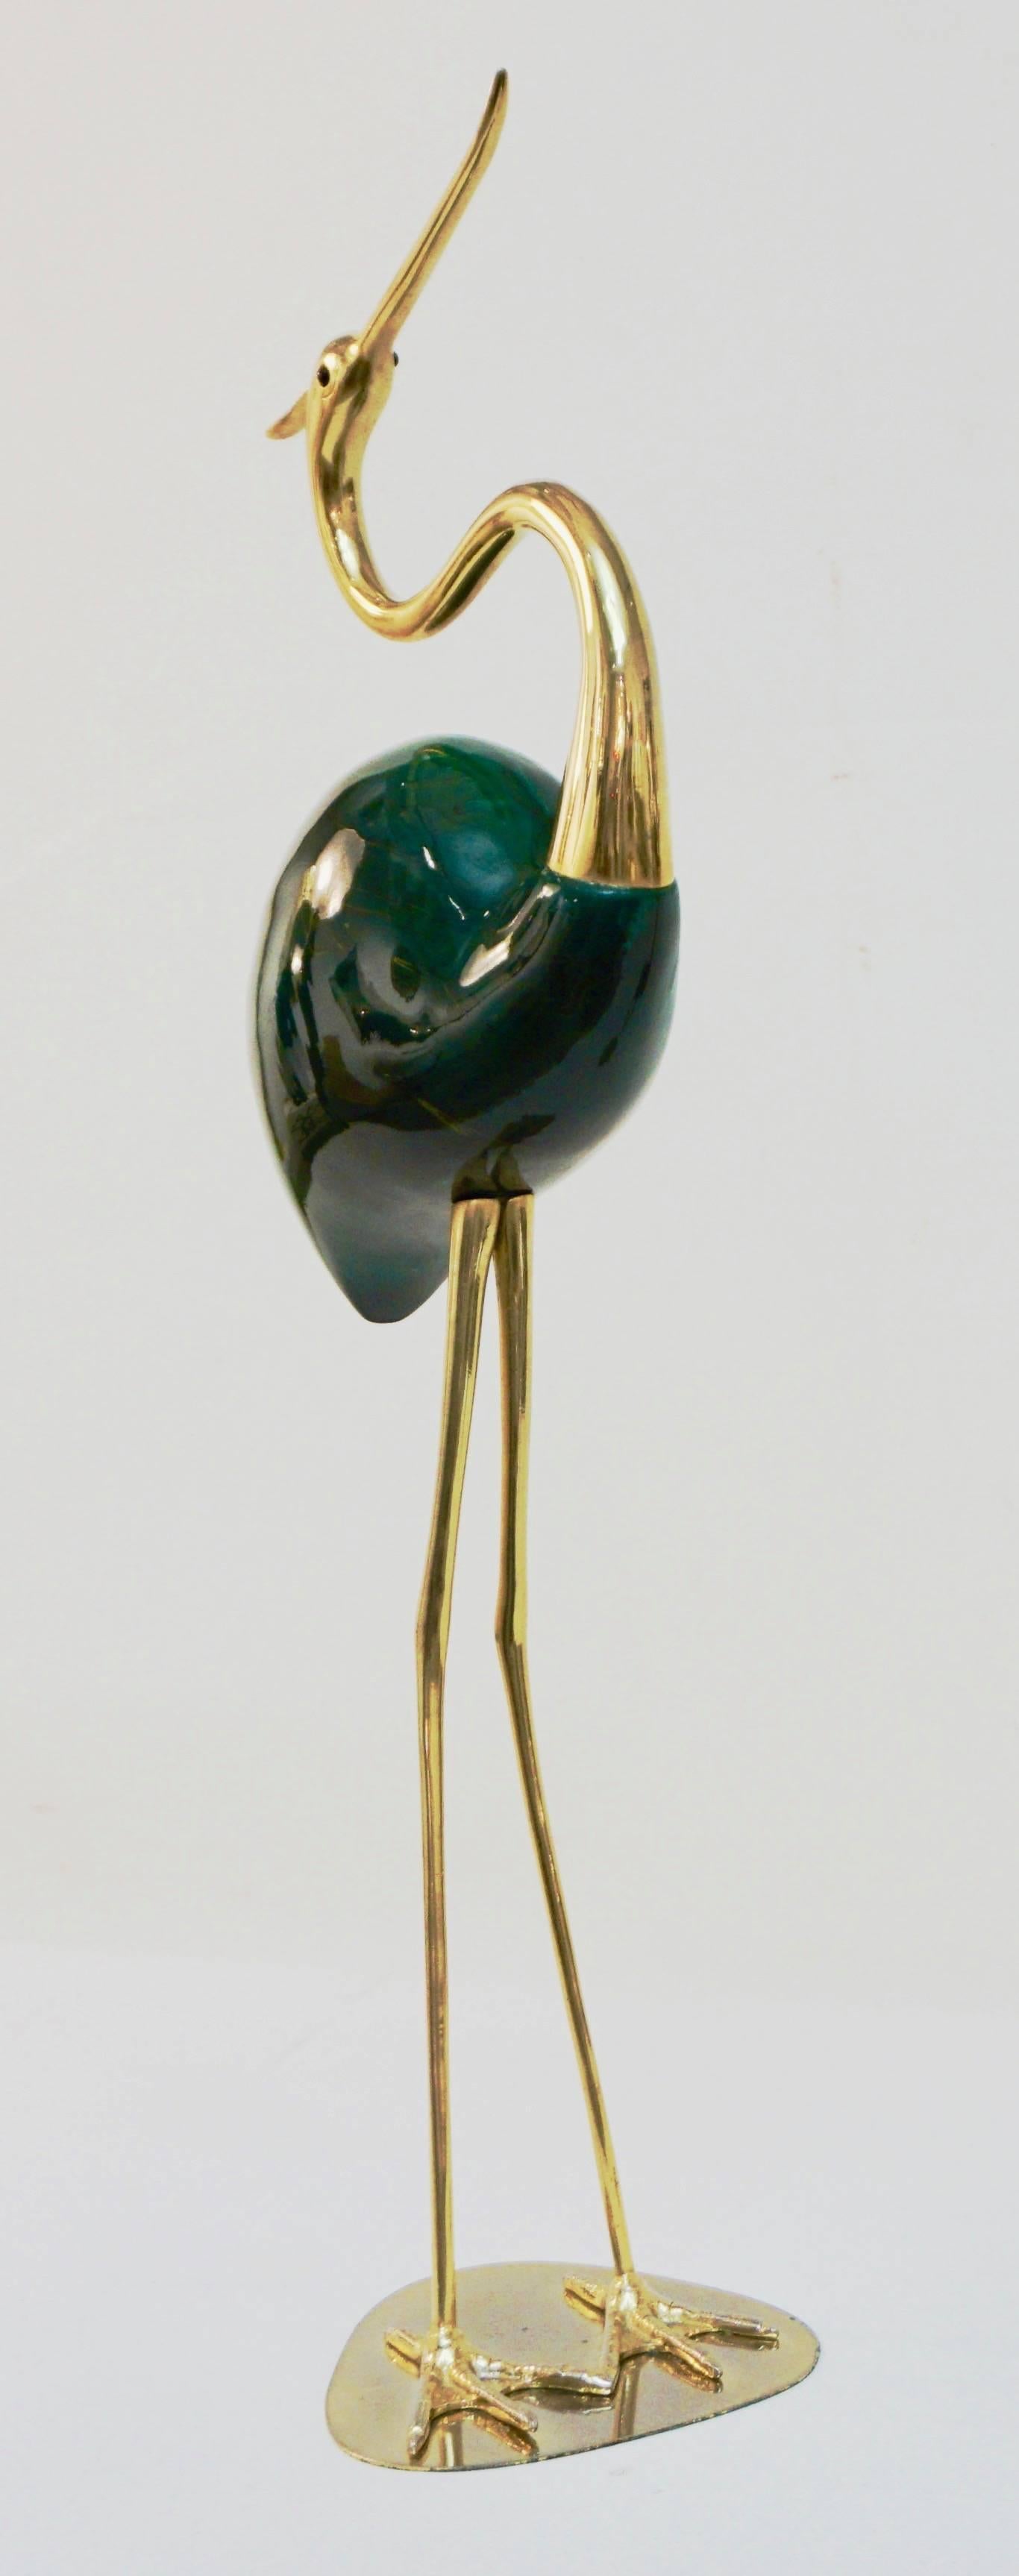 Hand-Carved Alessandro Petti 1960s Italian Brass and Green Enameled Flamingo Bird Sculpture